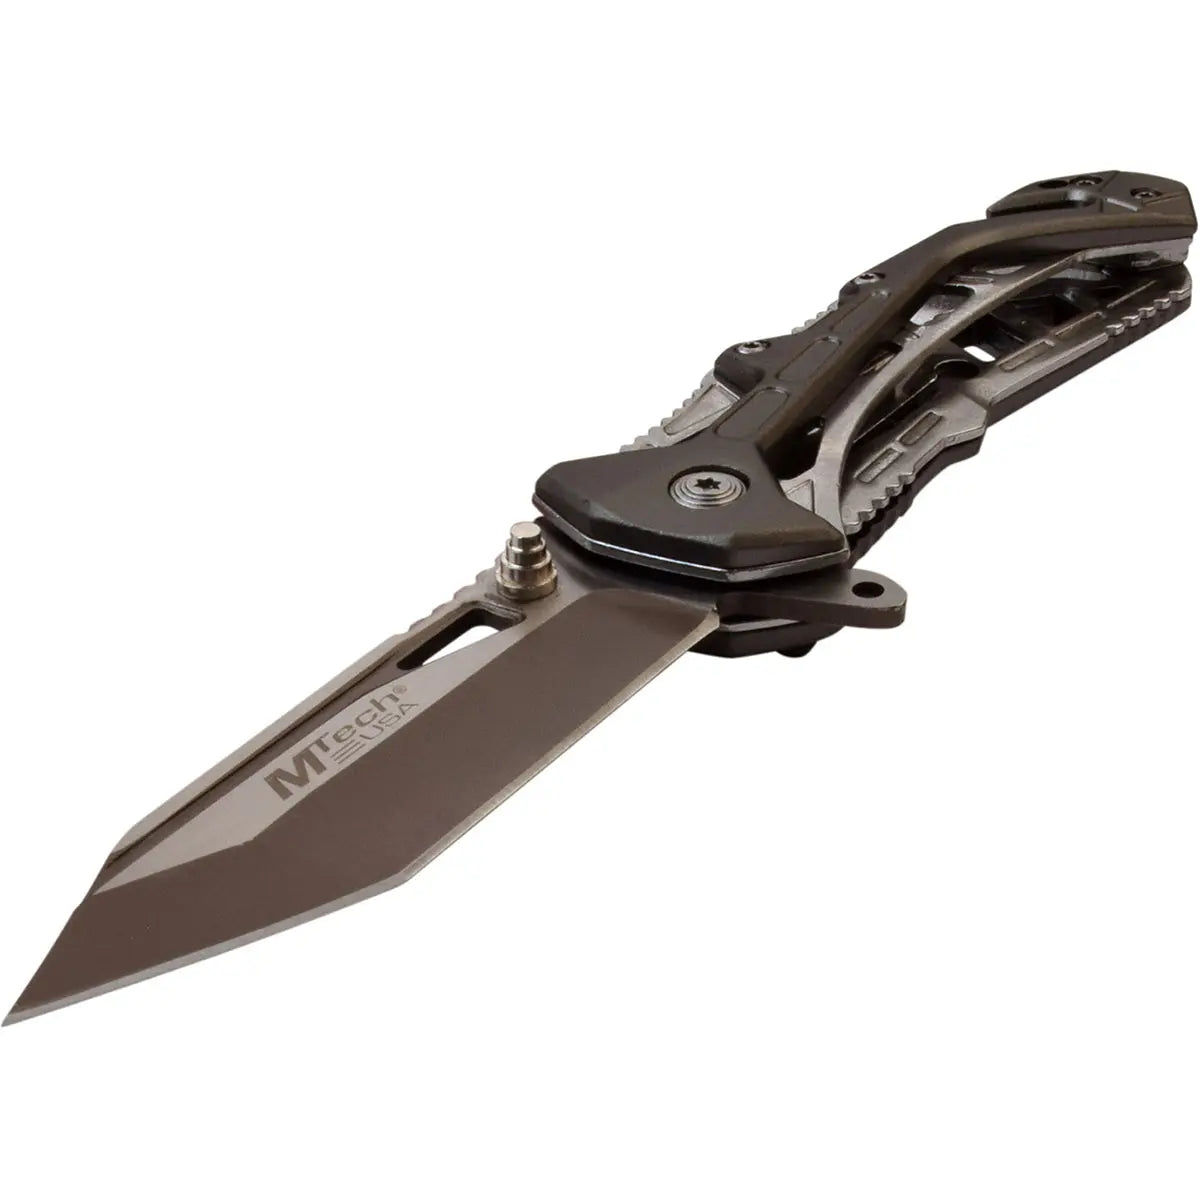 MTech USA Linerlock Spring Assisted Tanto Folding Knife Gray Anodized MT-A997BGY M-Tech